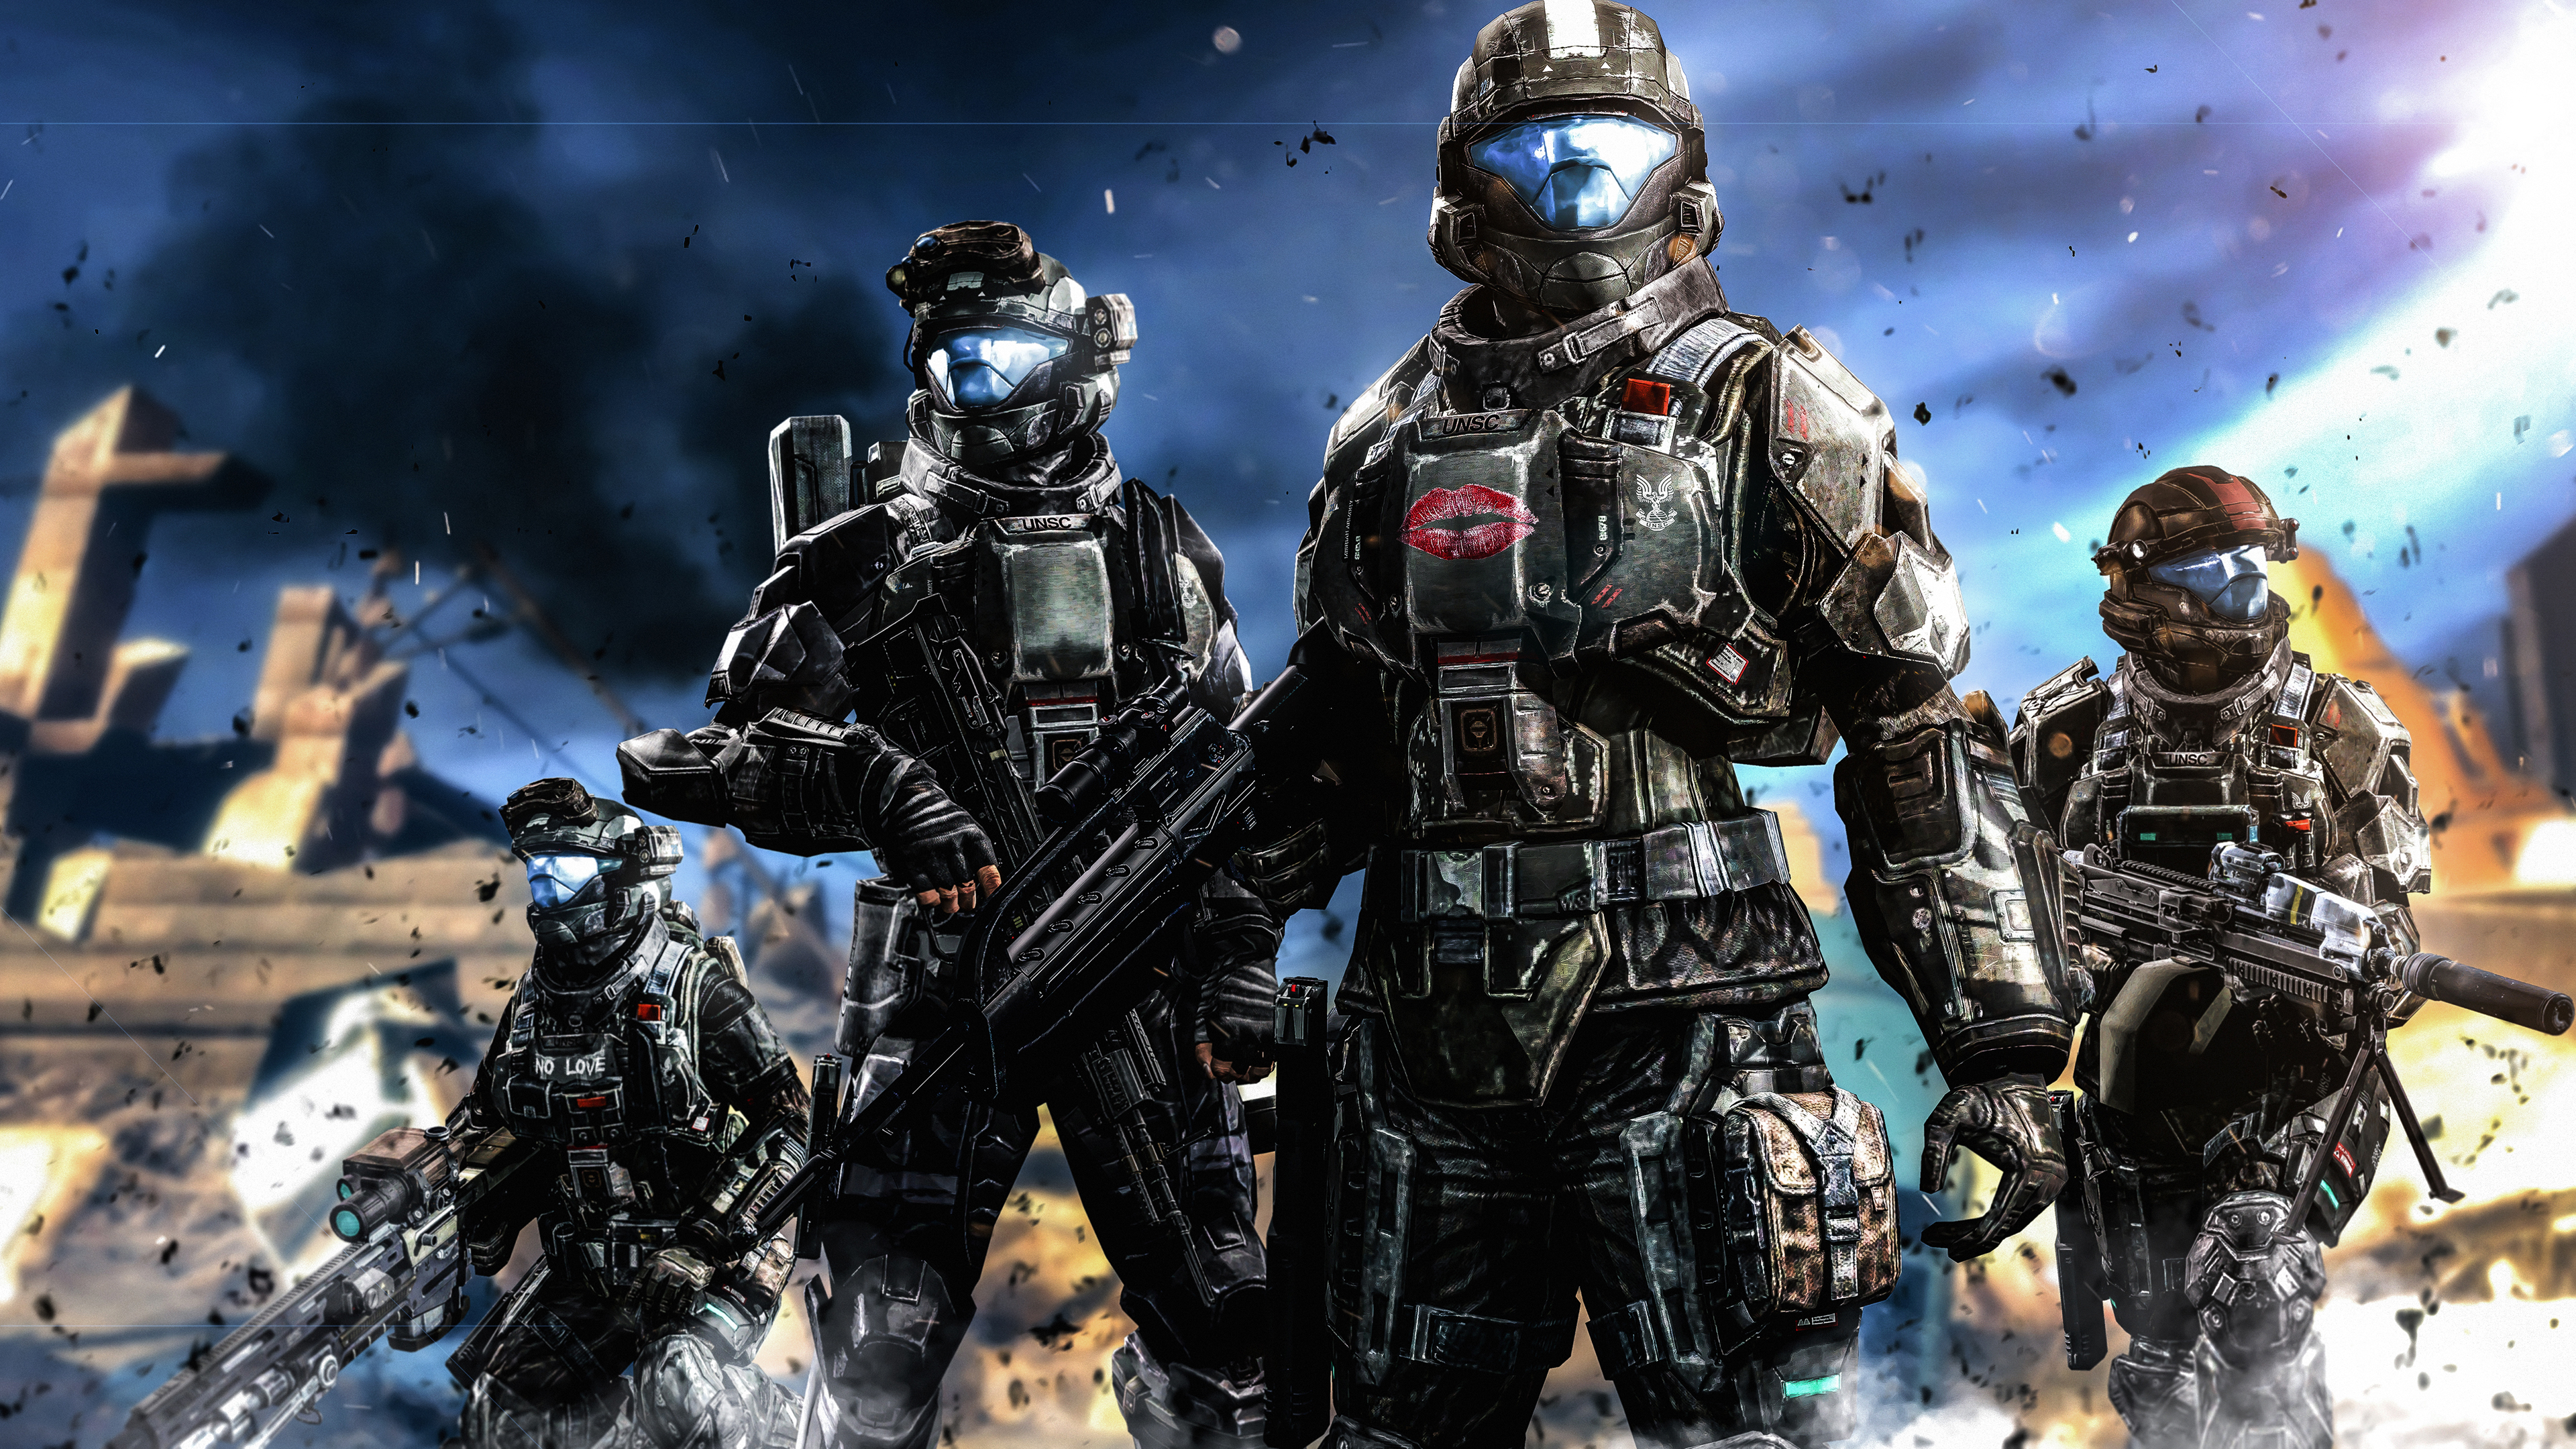 Halo Armors With Weapons K 2K Games